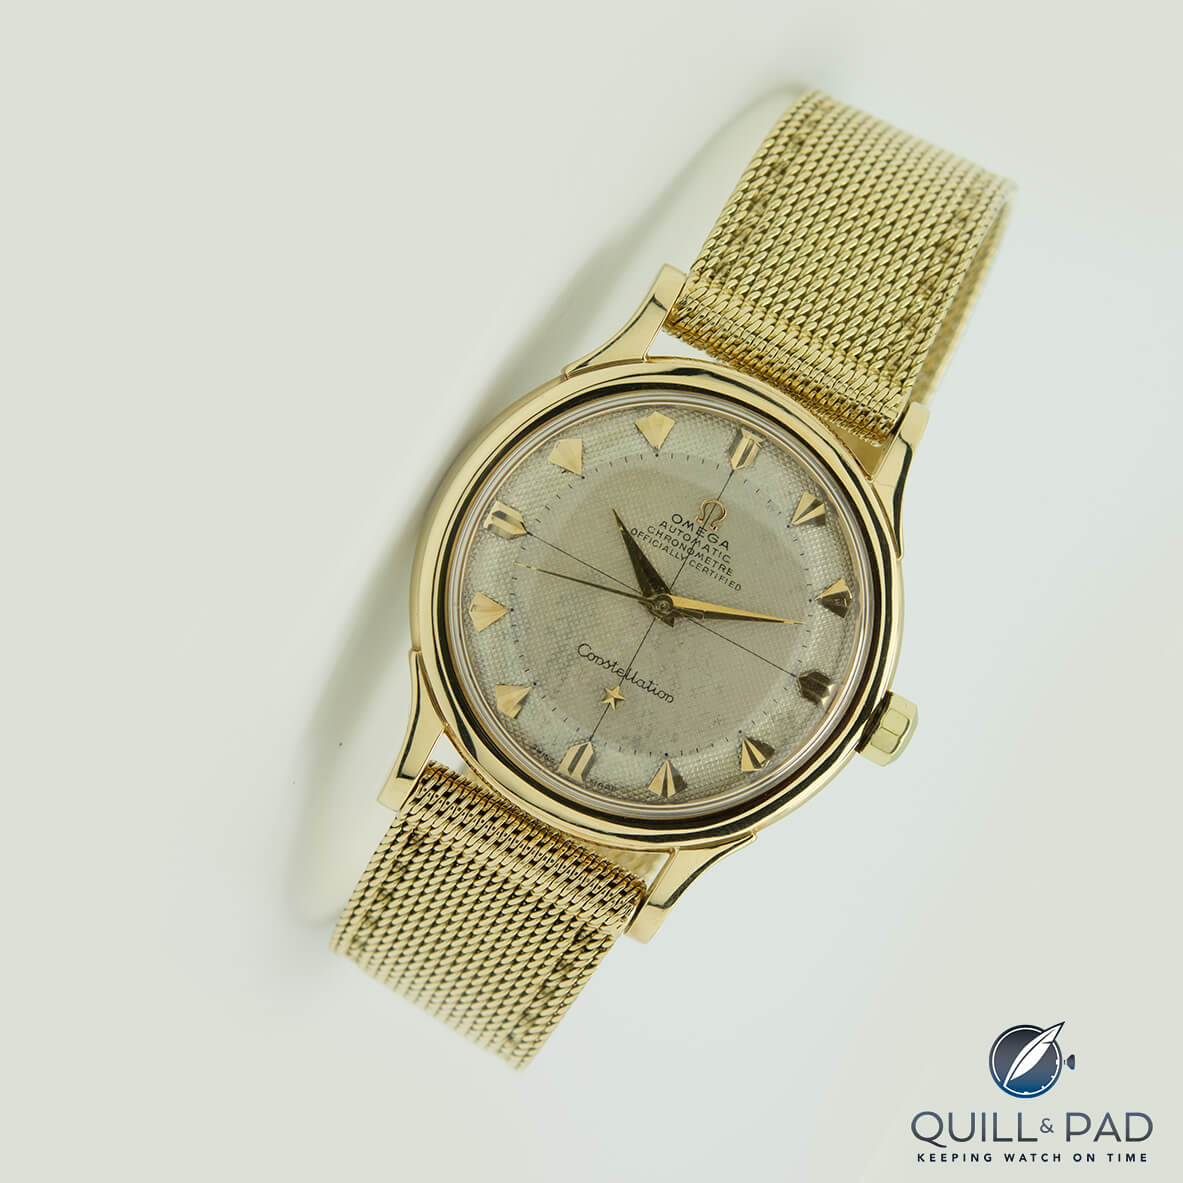 The Omega Constellation Reference 2652SC’s Caliber 352, a “bumper” automatic